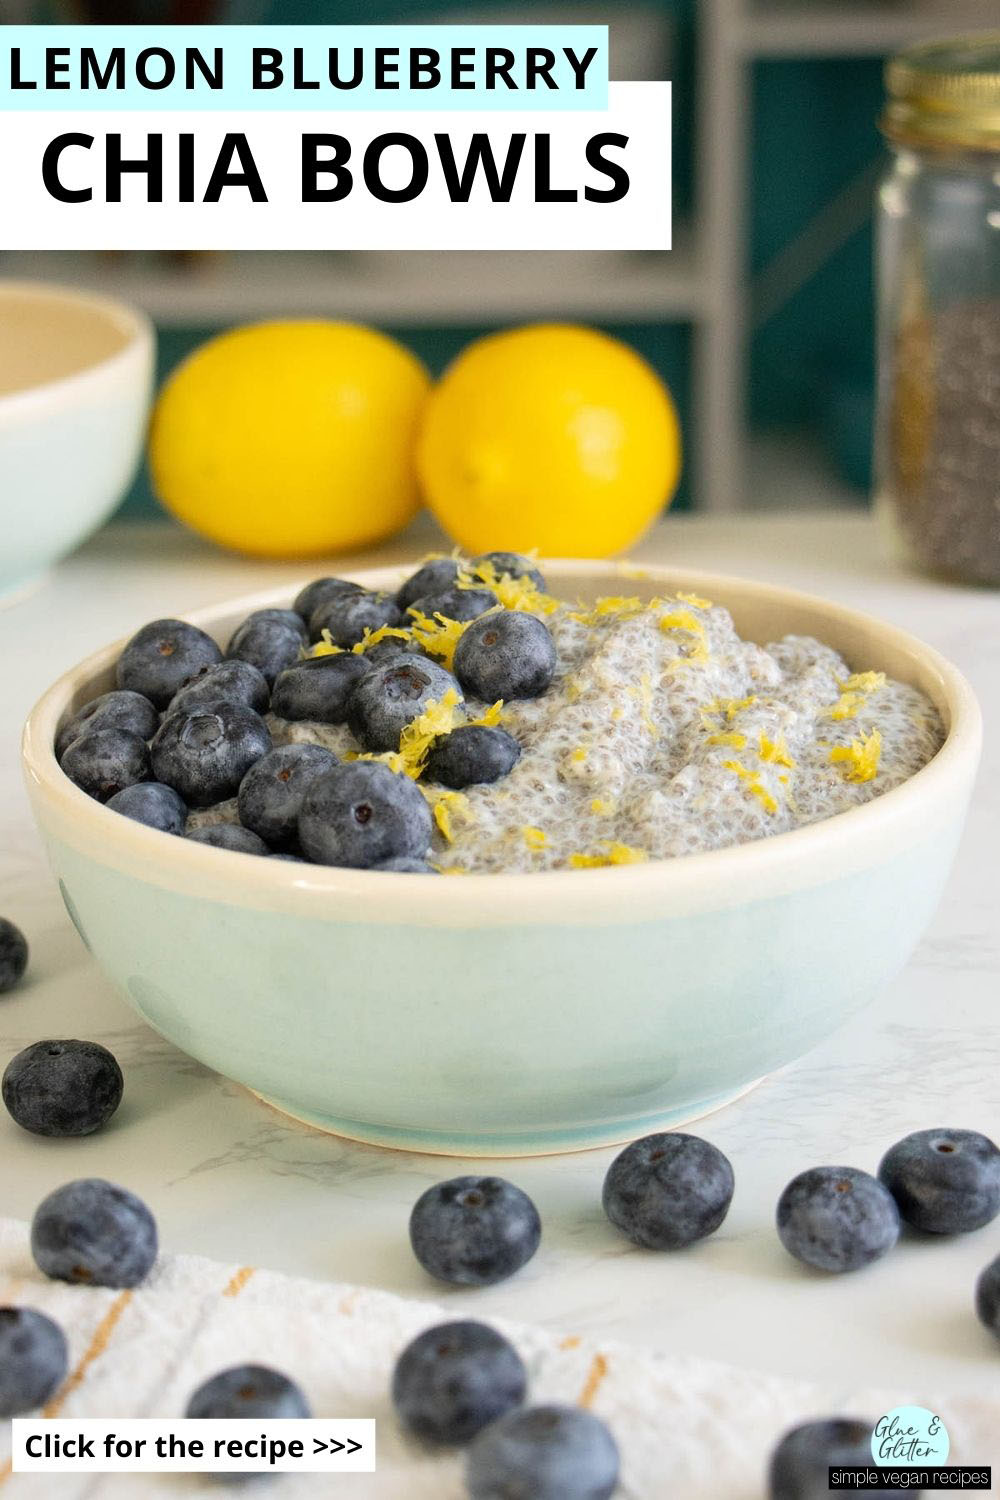 lemon blueberry chia pudding in a bowl on a white table with lemons, berries, and chia seeds around it, text overlay